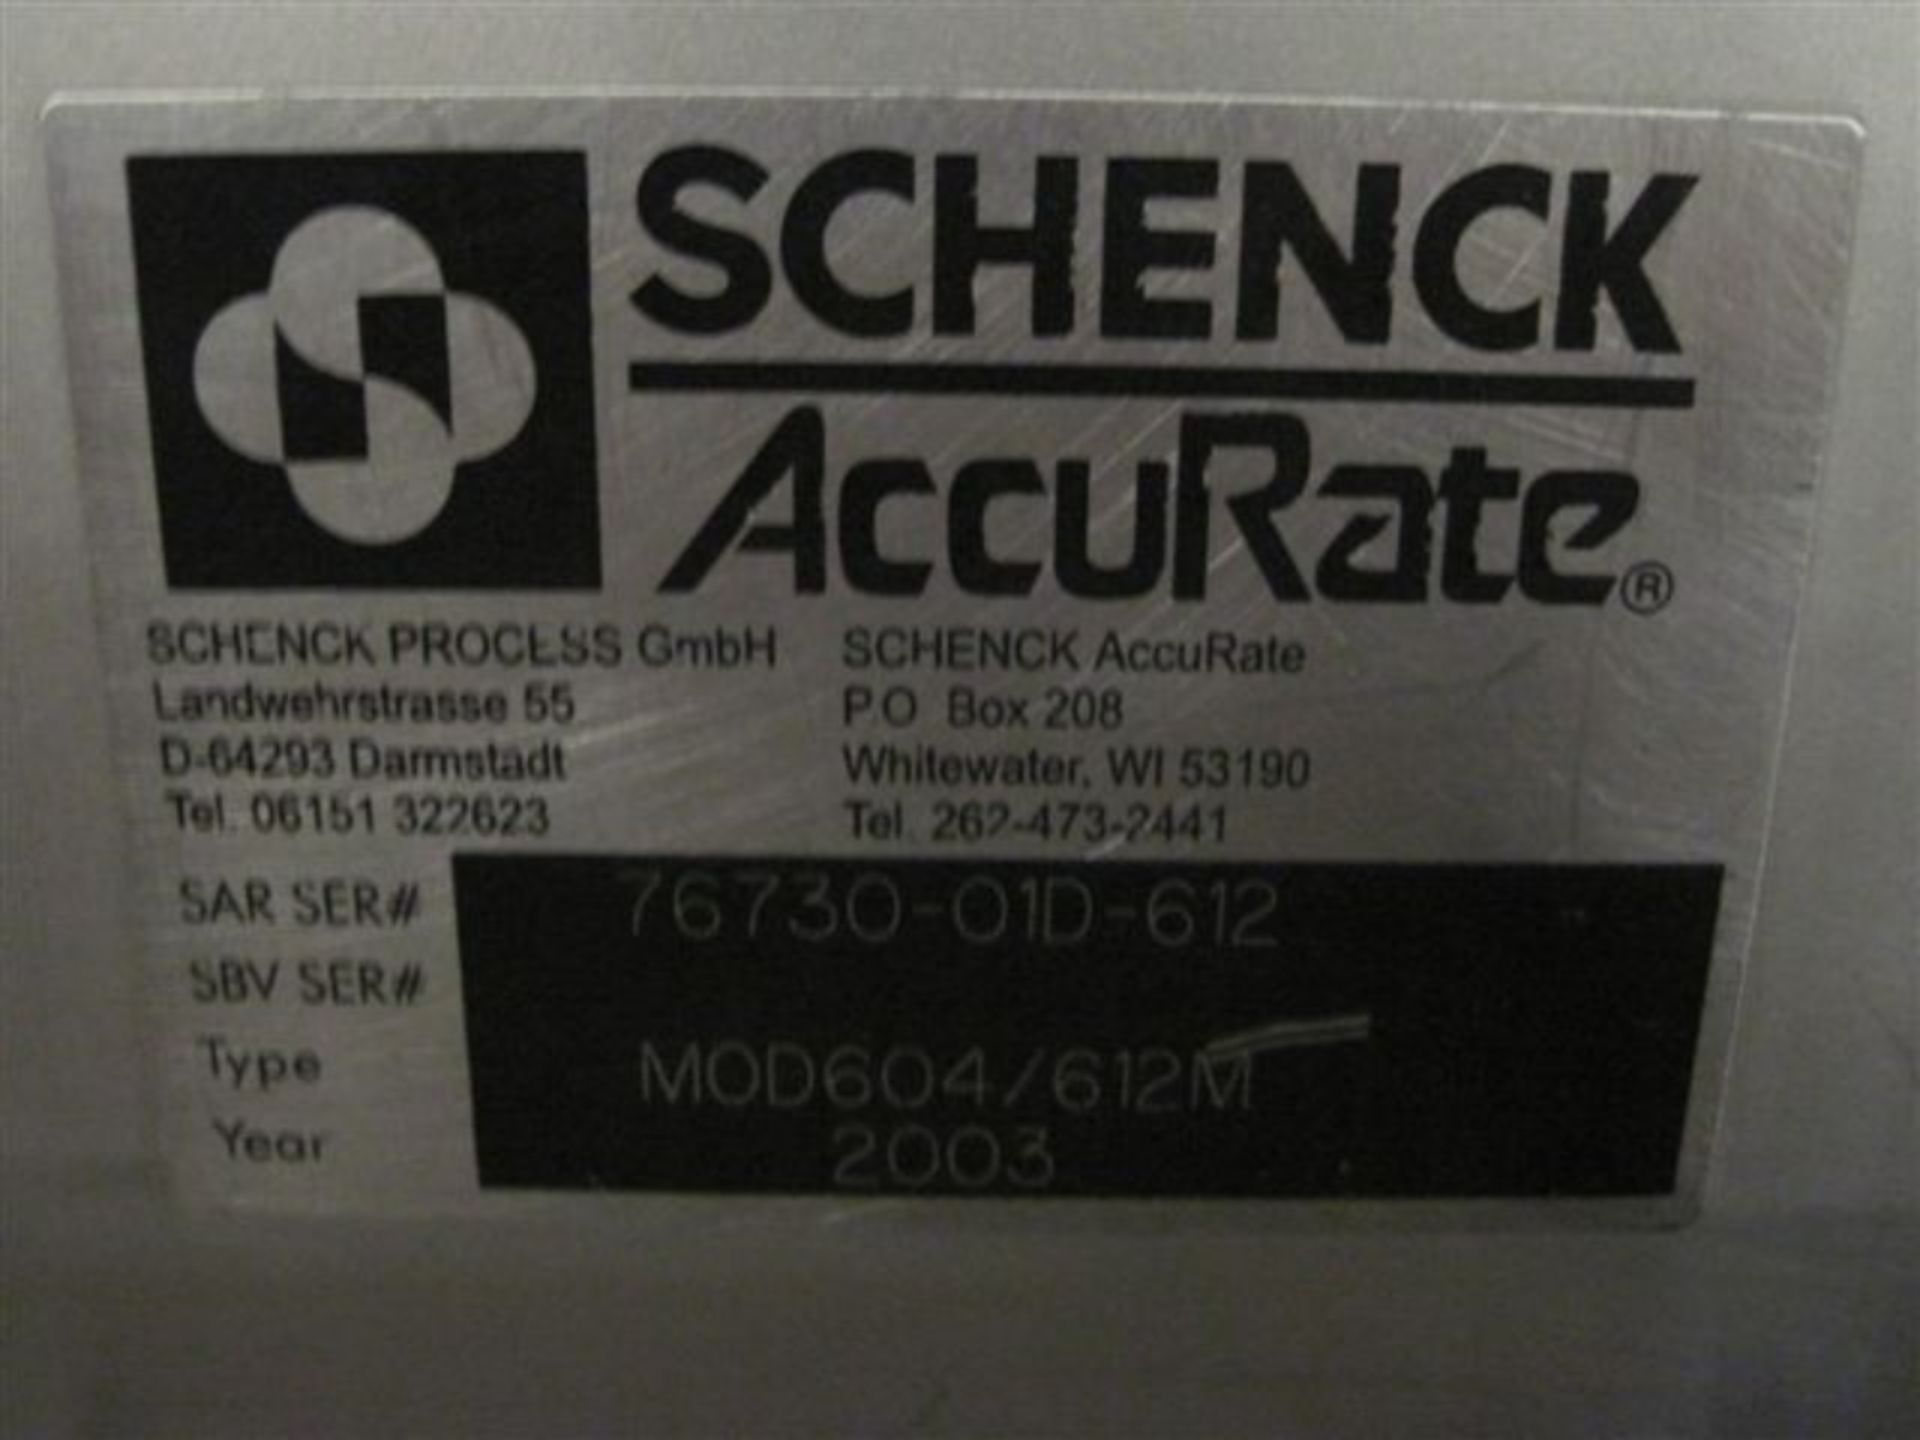 Schenck Accurate Model 604/612M Feeder - Image 2 of 5